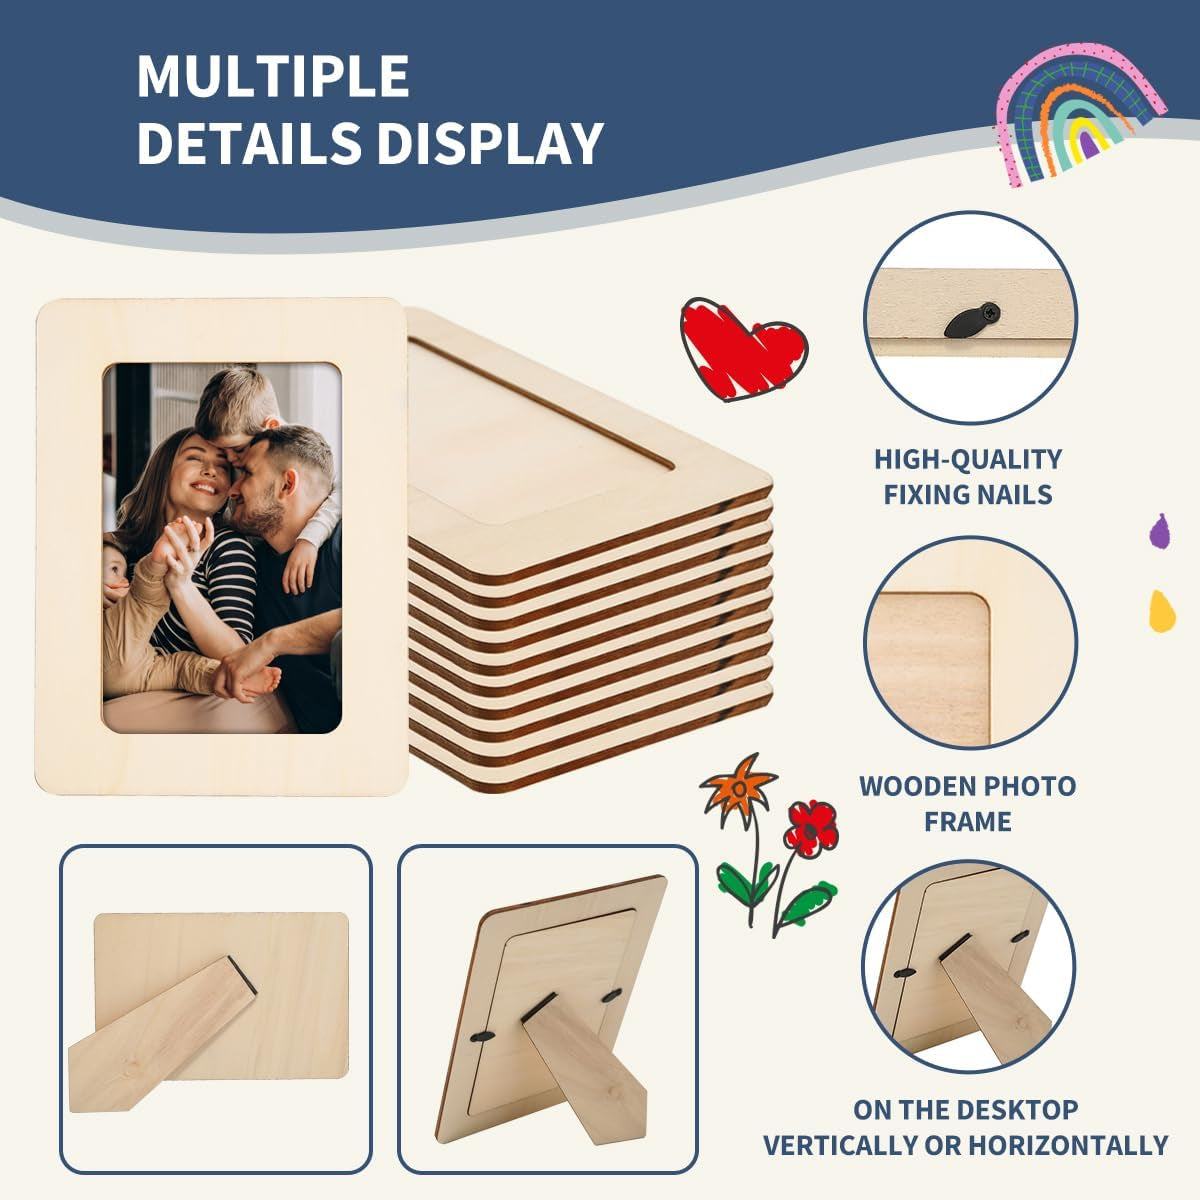 Picture Frame Painting Craft Kit for 4 * 6 Photo,10Pcs DIY Unfinished Wooden Picture Frames with 12Pcs Painting Color Pen 4 Sheets Crystal Diamond Stickers for DIY Craft